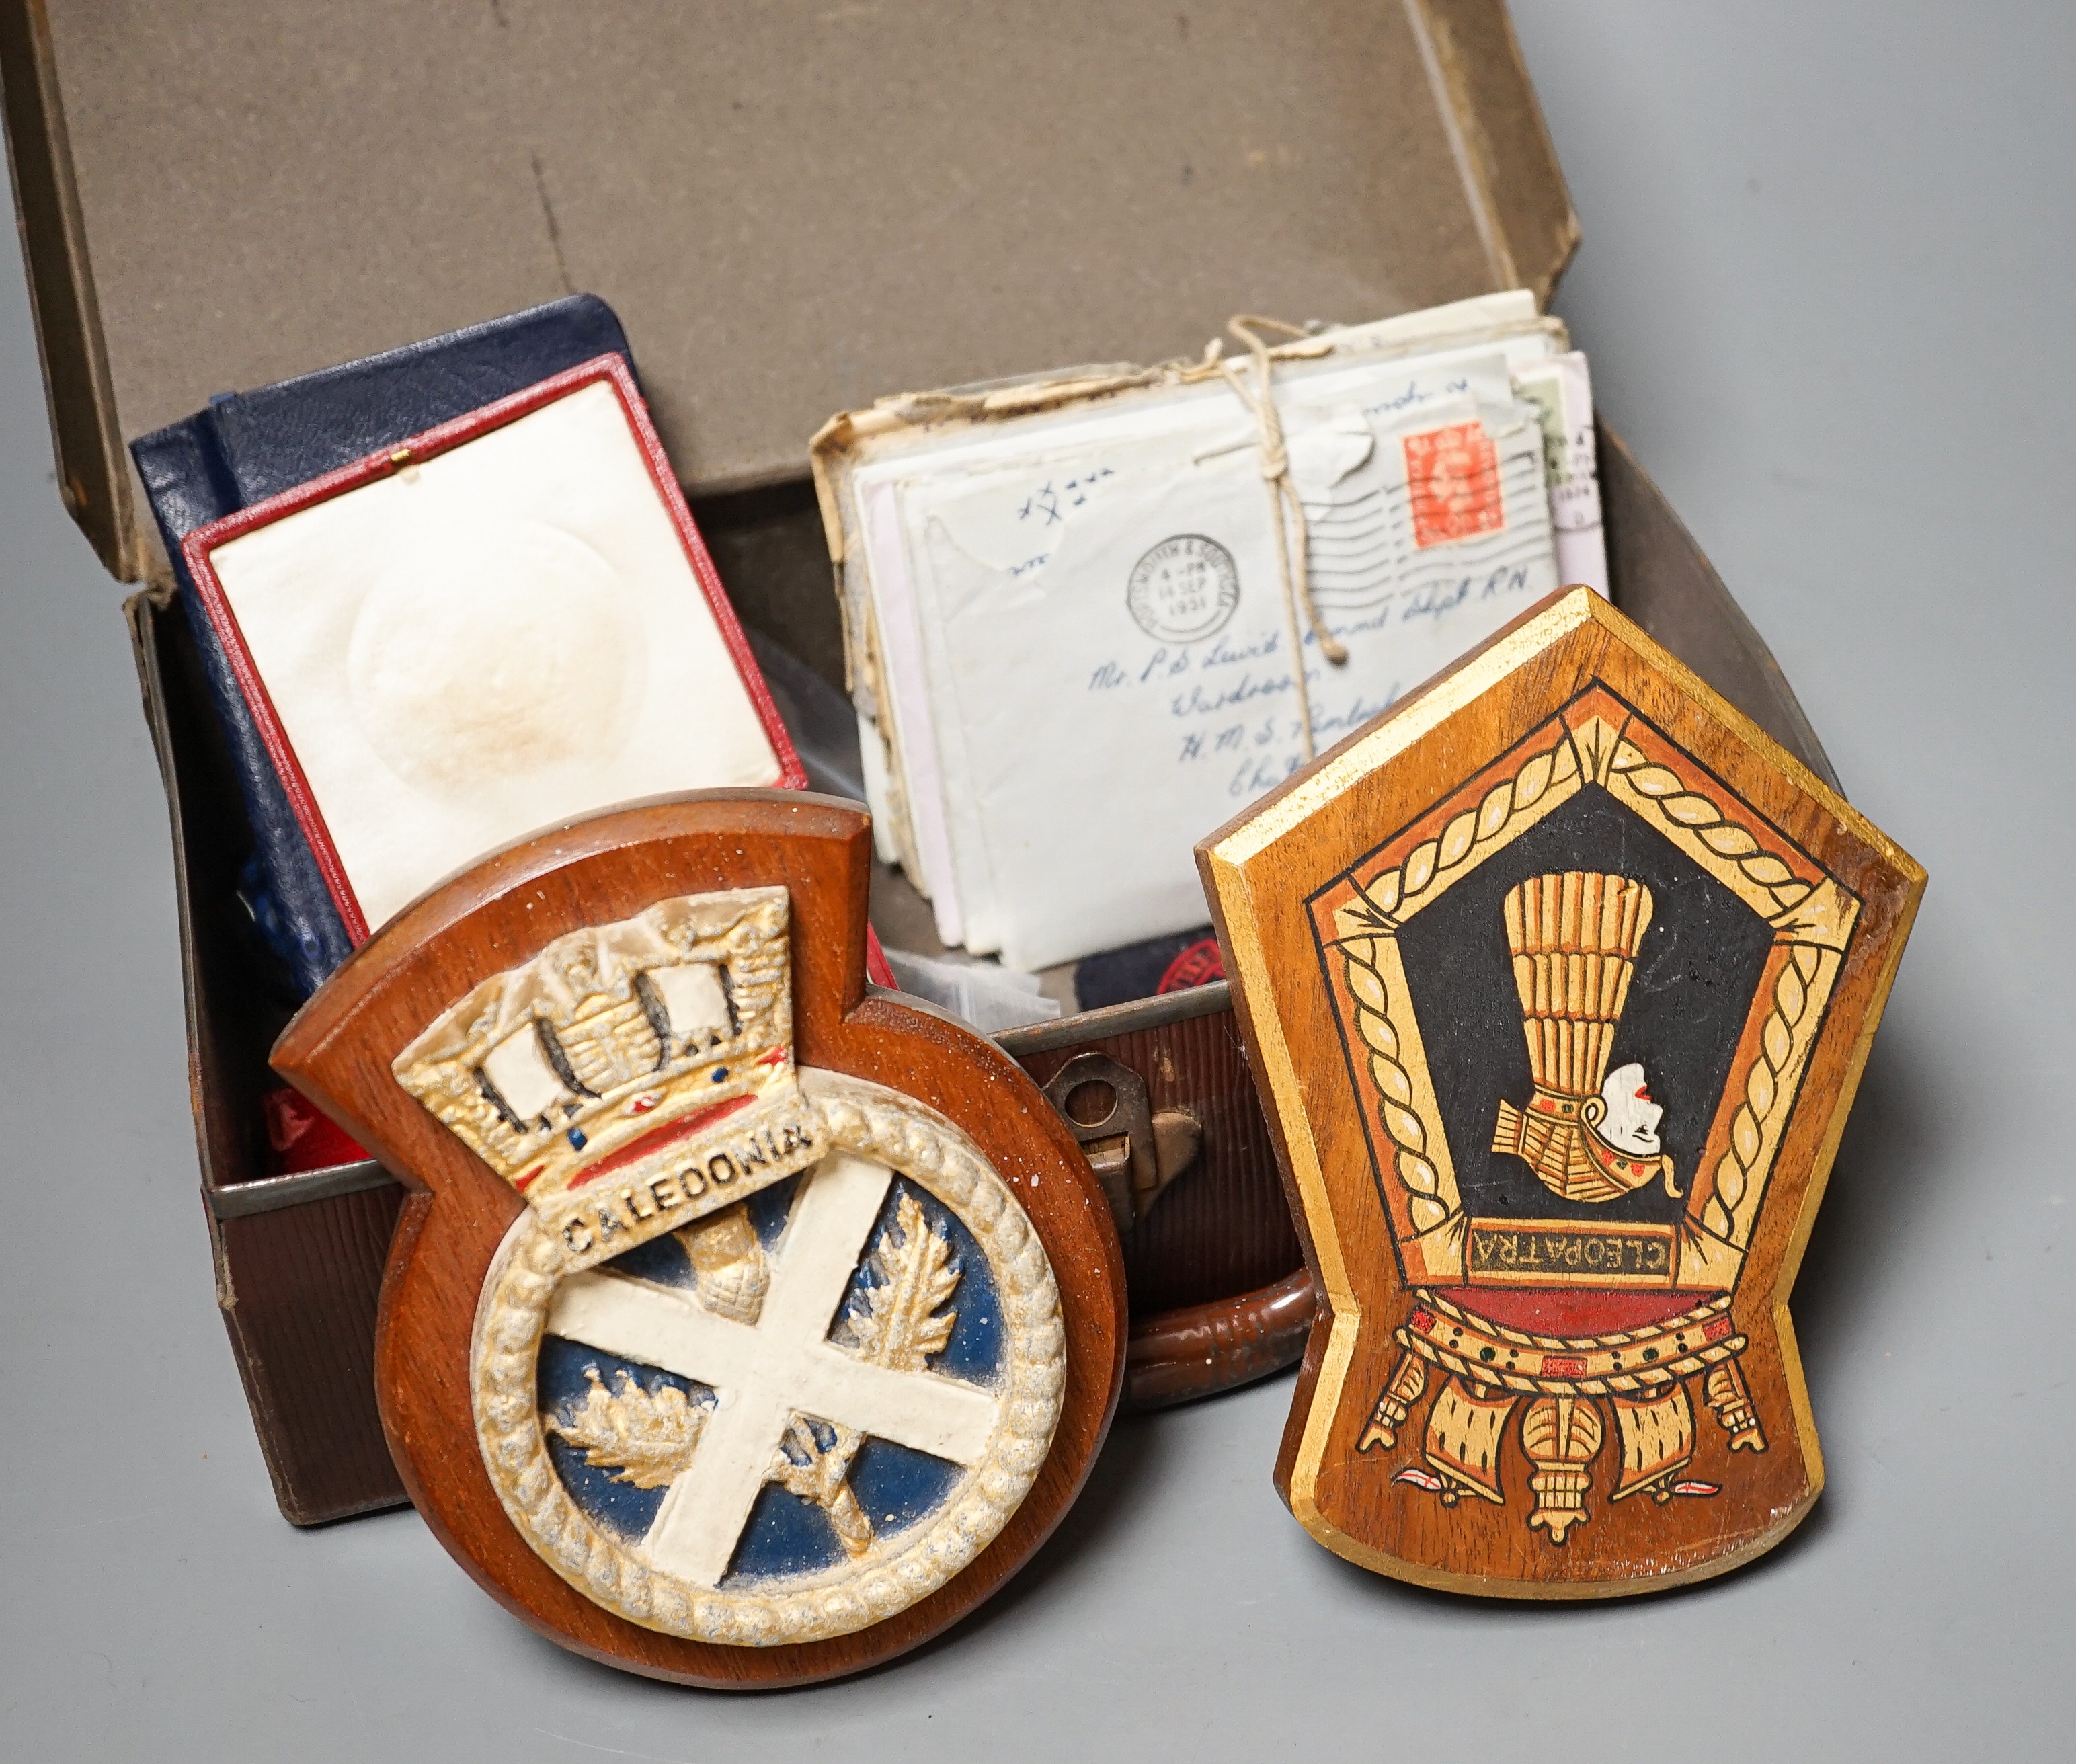 A group of naval related items including plaques, medals, diary, letters etc. and a group of coins.